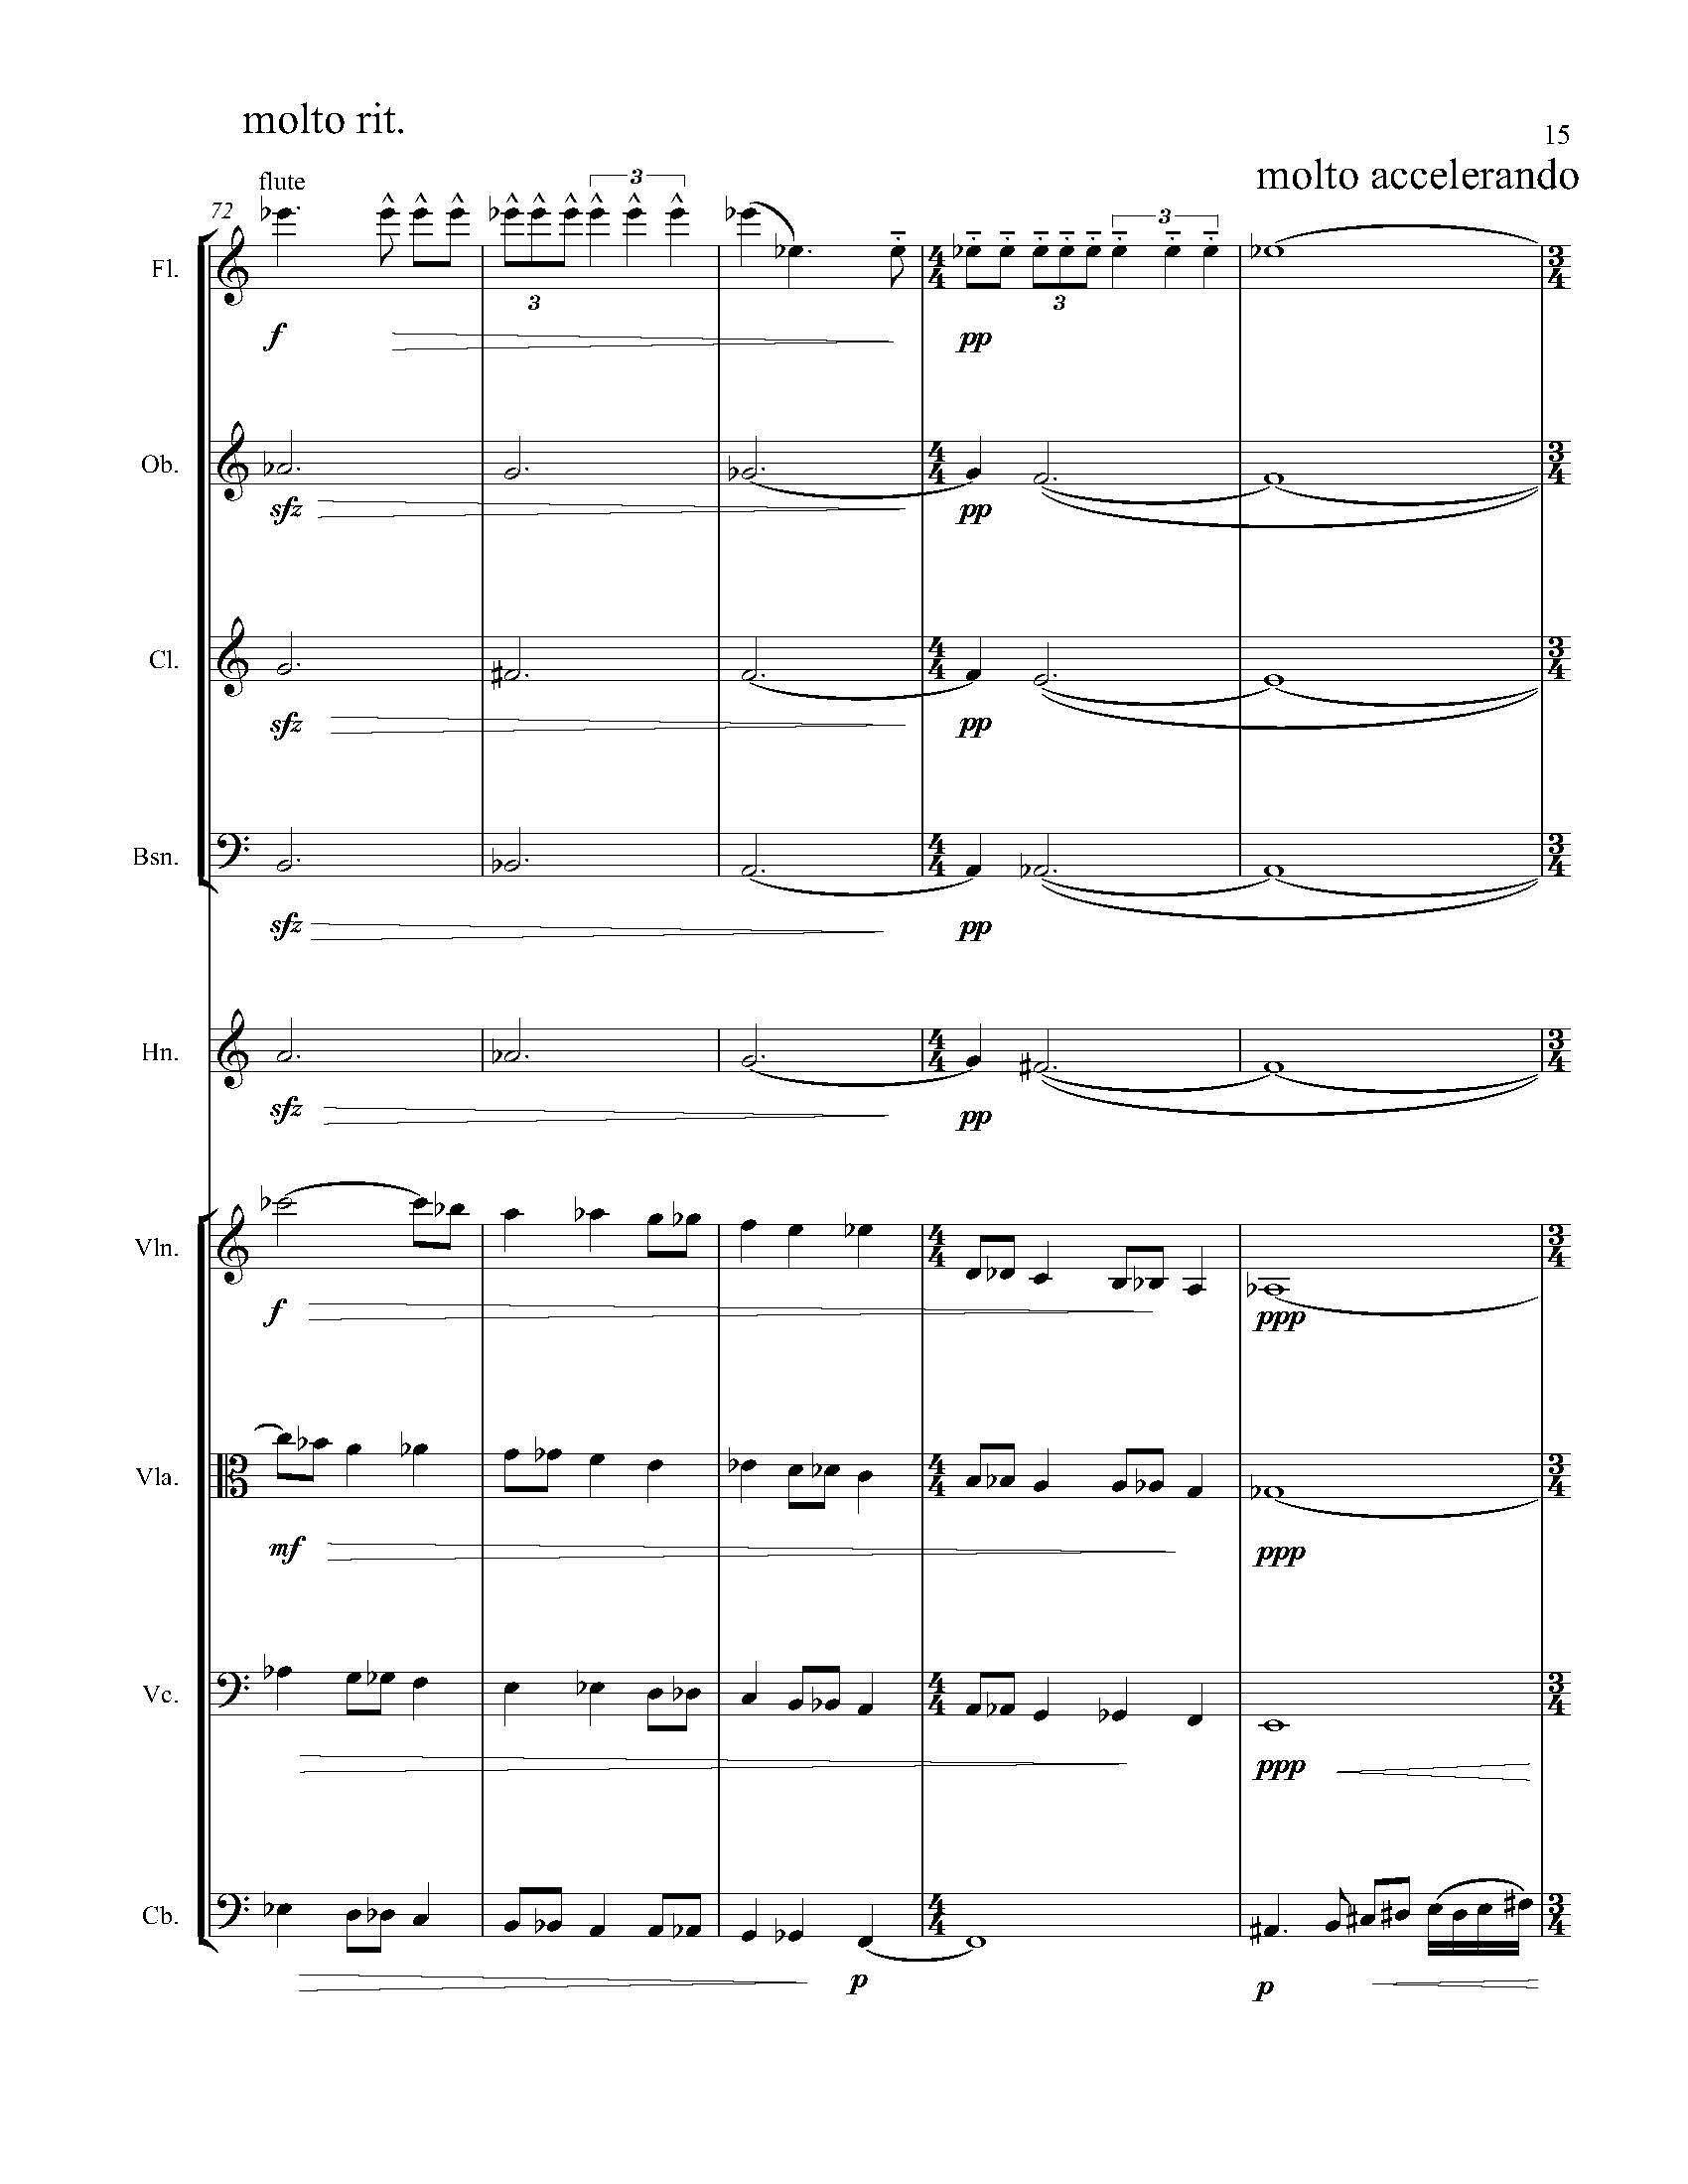 In Search of a Bird - Complete Score_Page_21.jpg